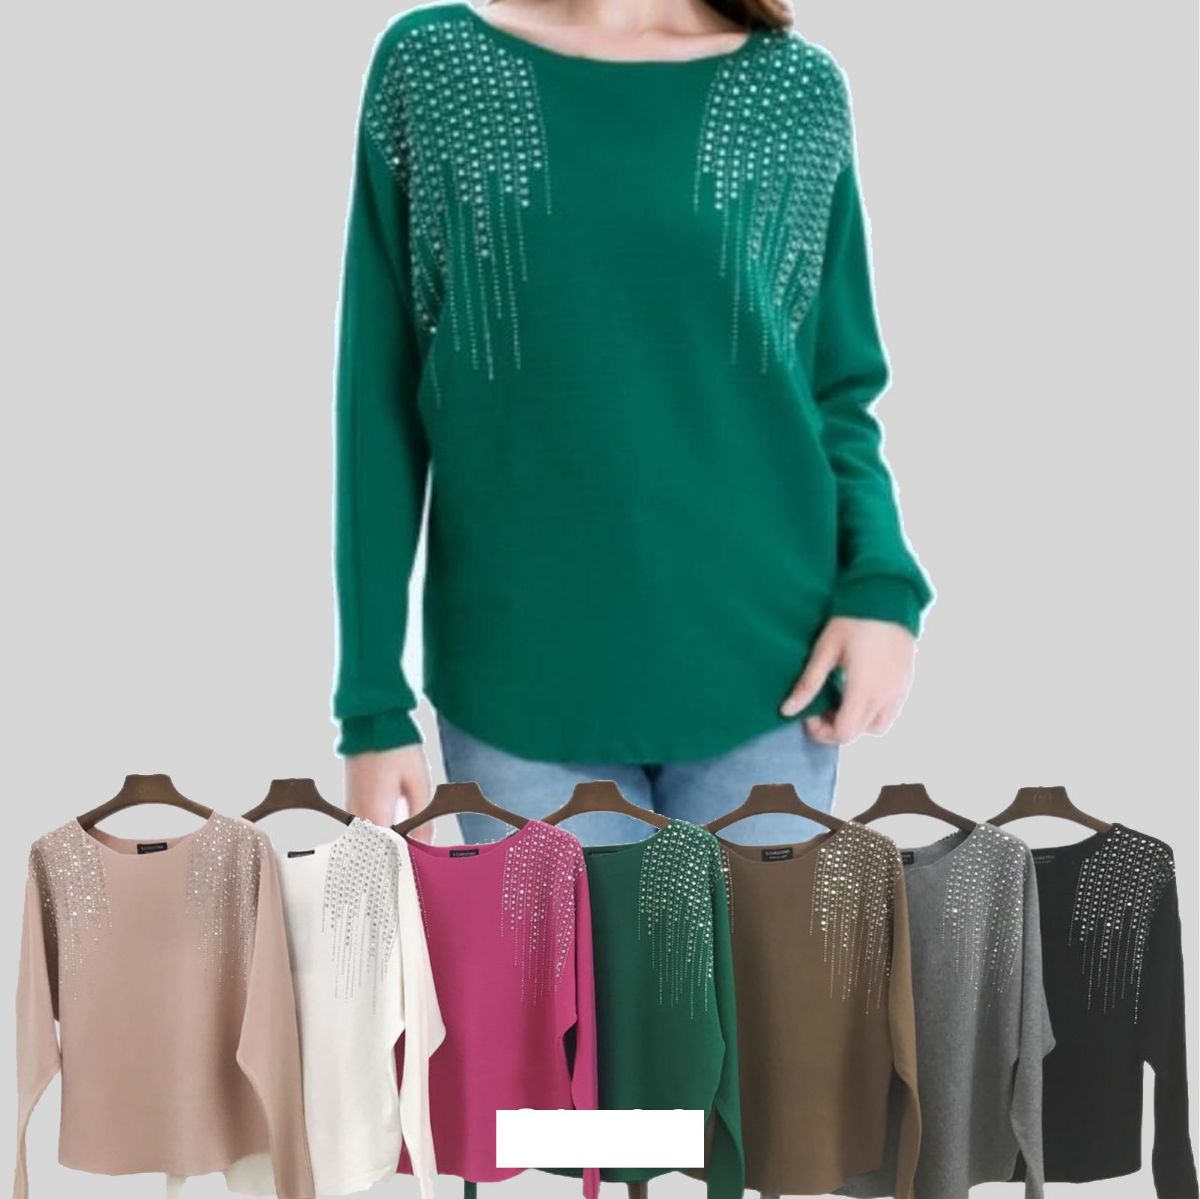 12 Pieces of Knitted Cashmere Baggy Sweater Rhinestone Design L/xl